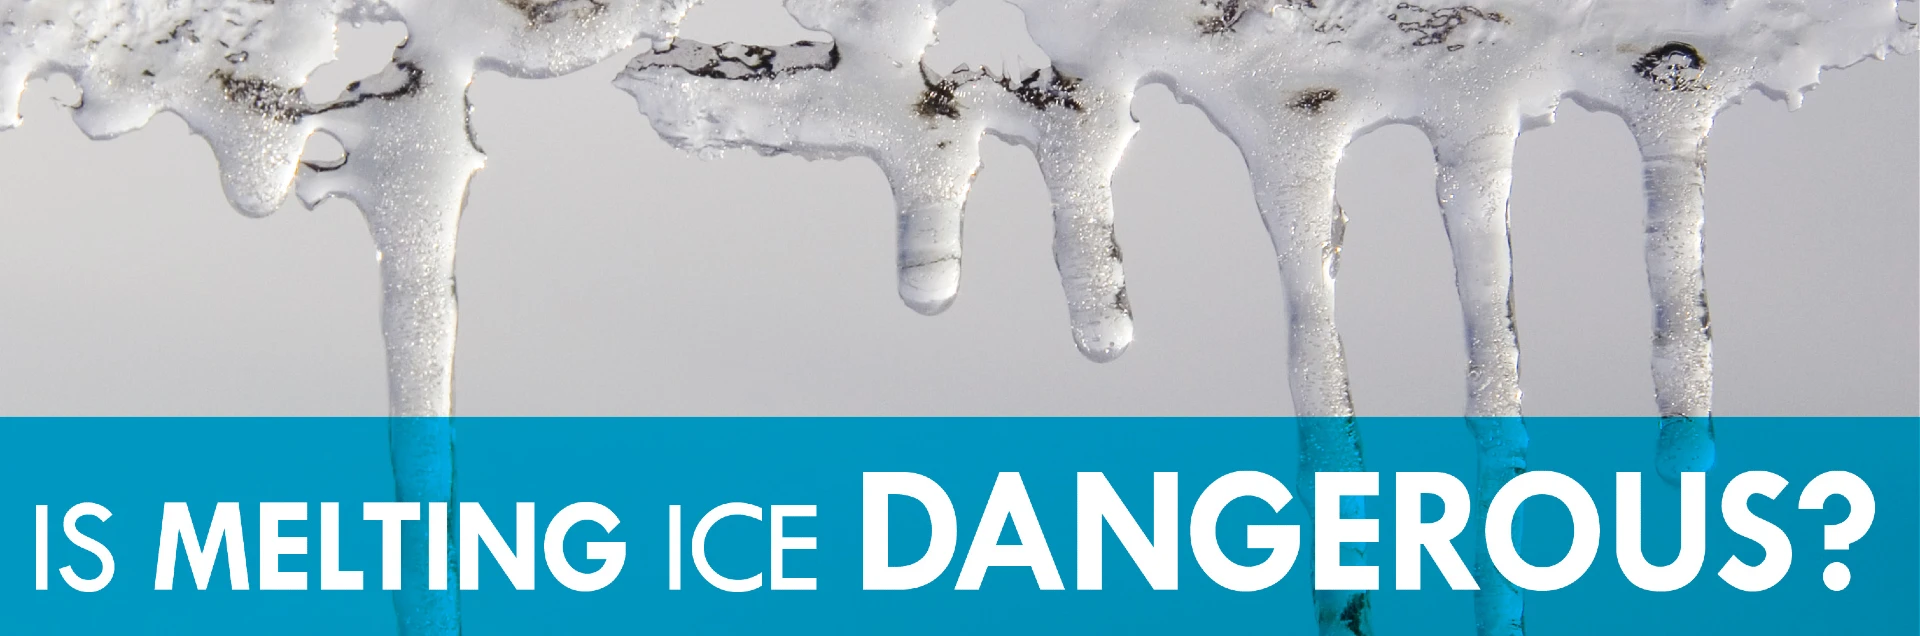 Ice with text-Is melting ice dangerous?